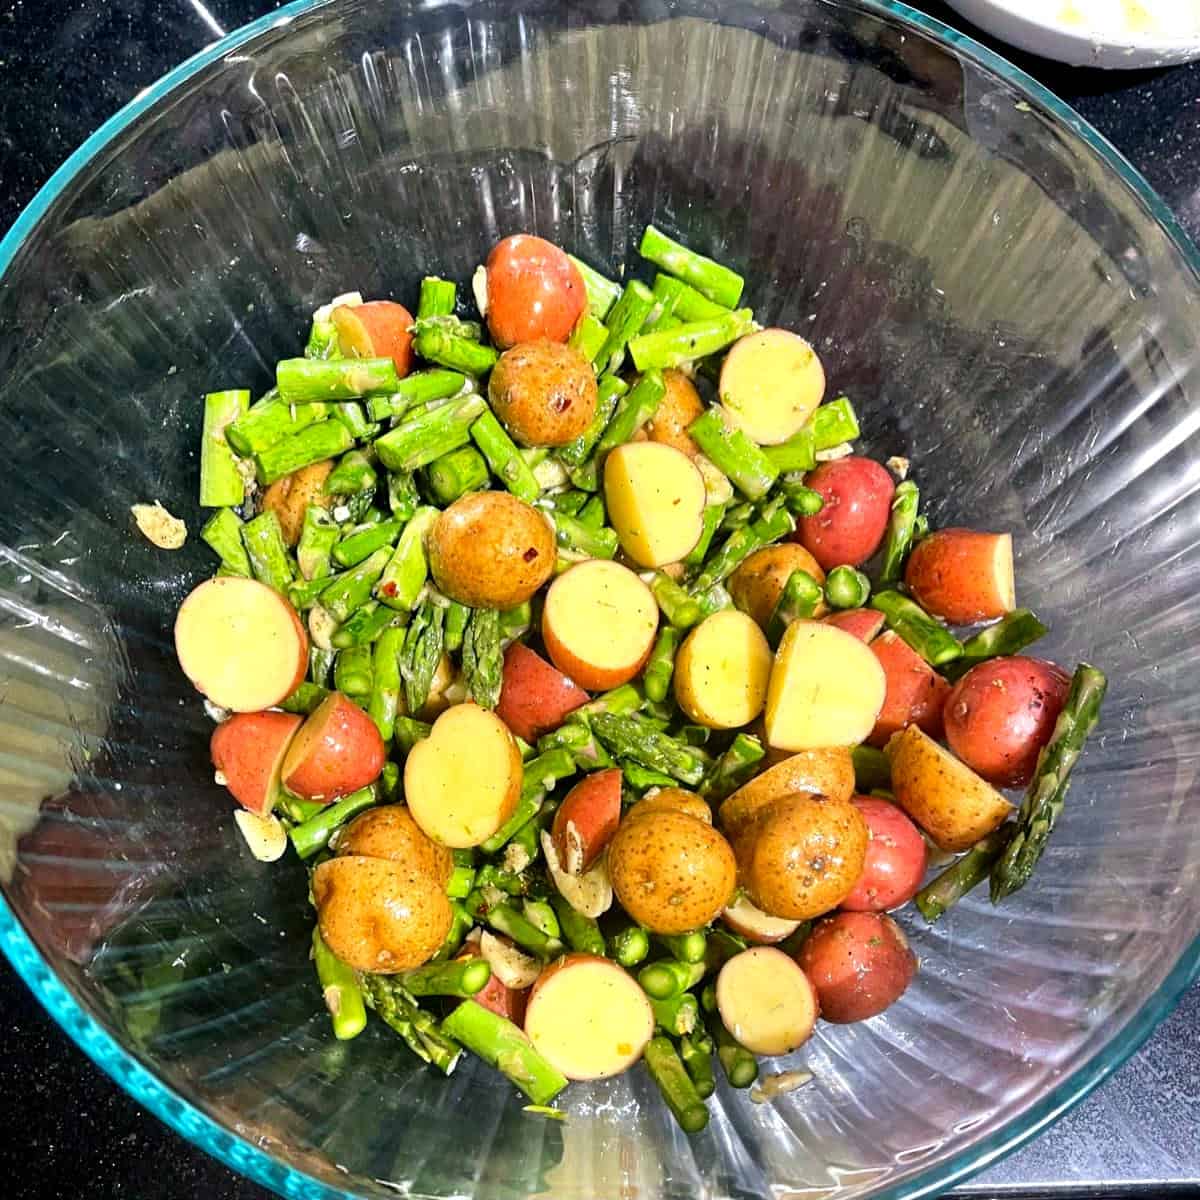 Toss potatoes and asparagus with olive oil and herbs in large bowl.